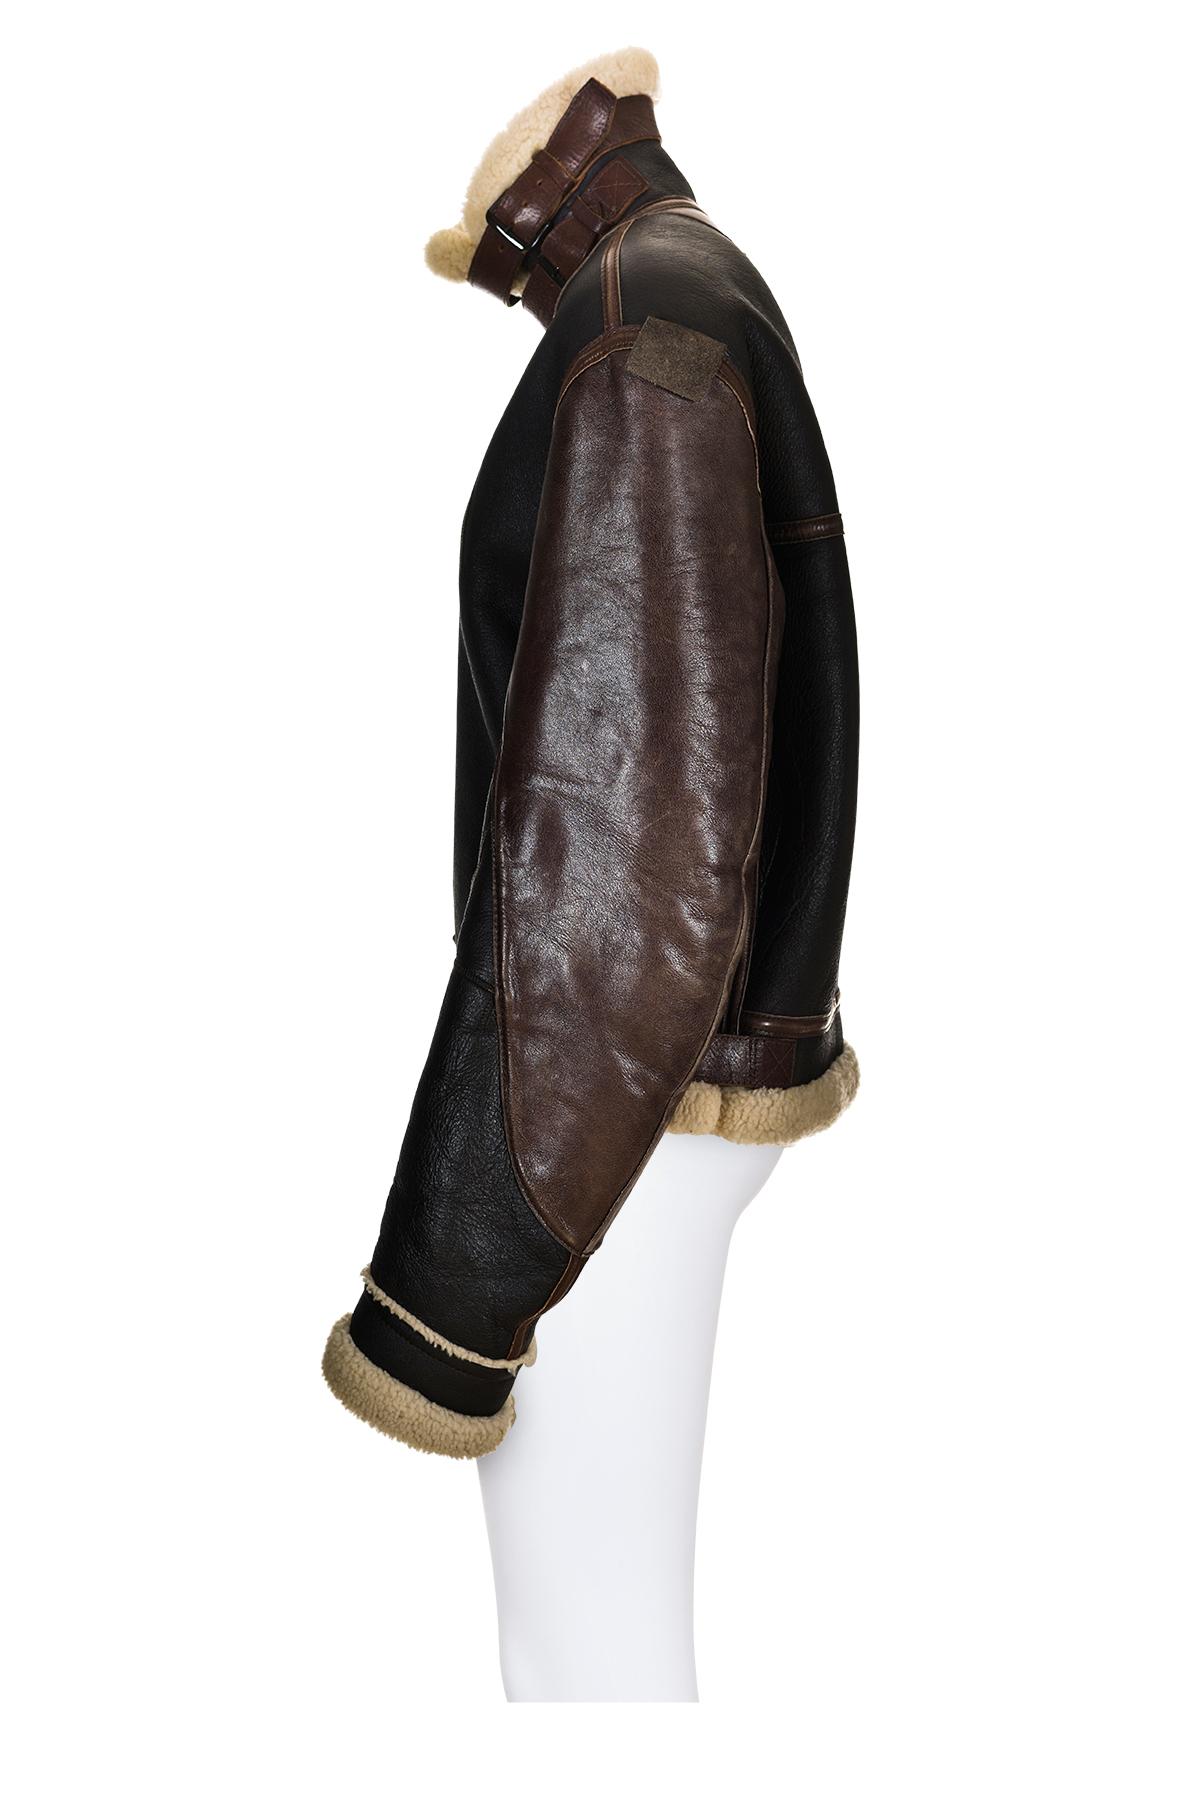 BALENCIAGA BY NICOLAS GHESQUIÈRE FW 03 Iconic Shearling Aviator Jacket In Good Condition For Sale In Milano, MILANO